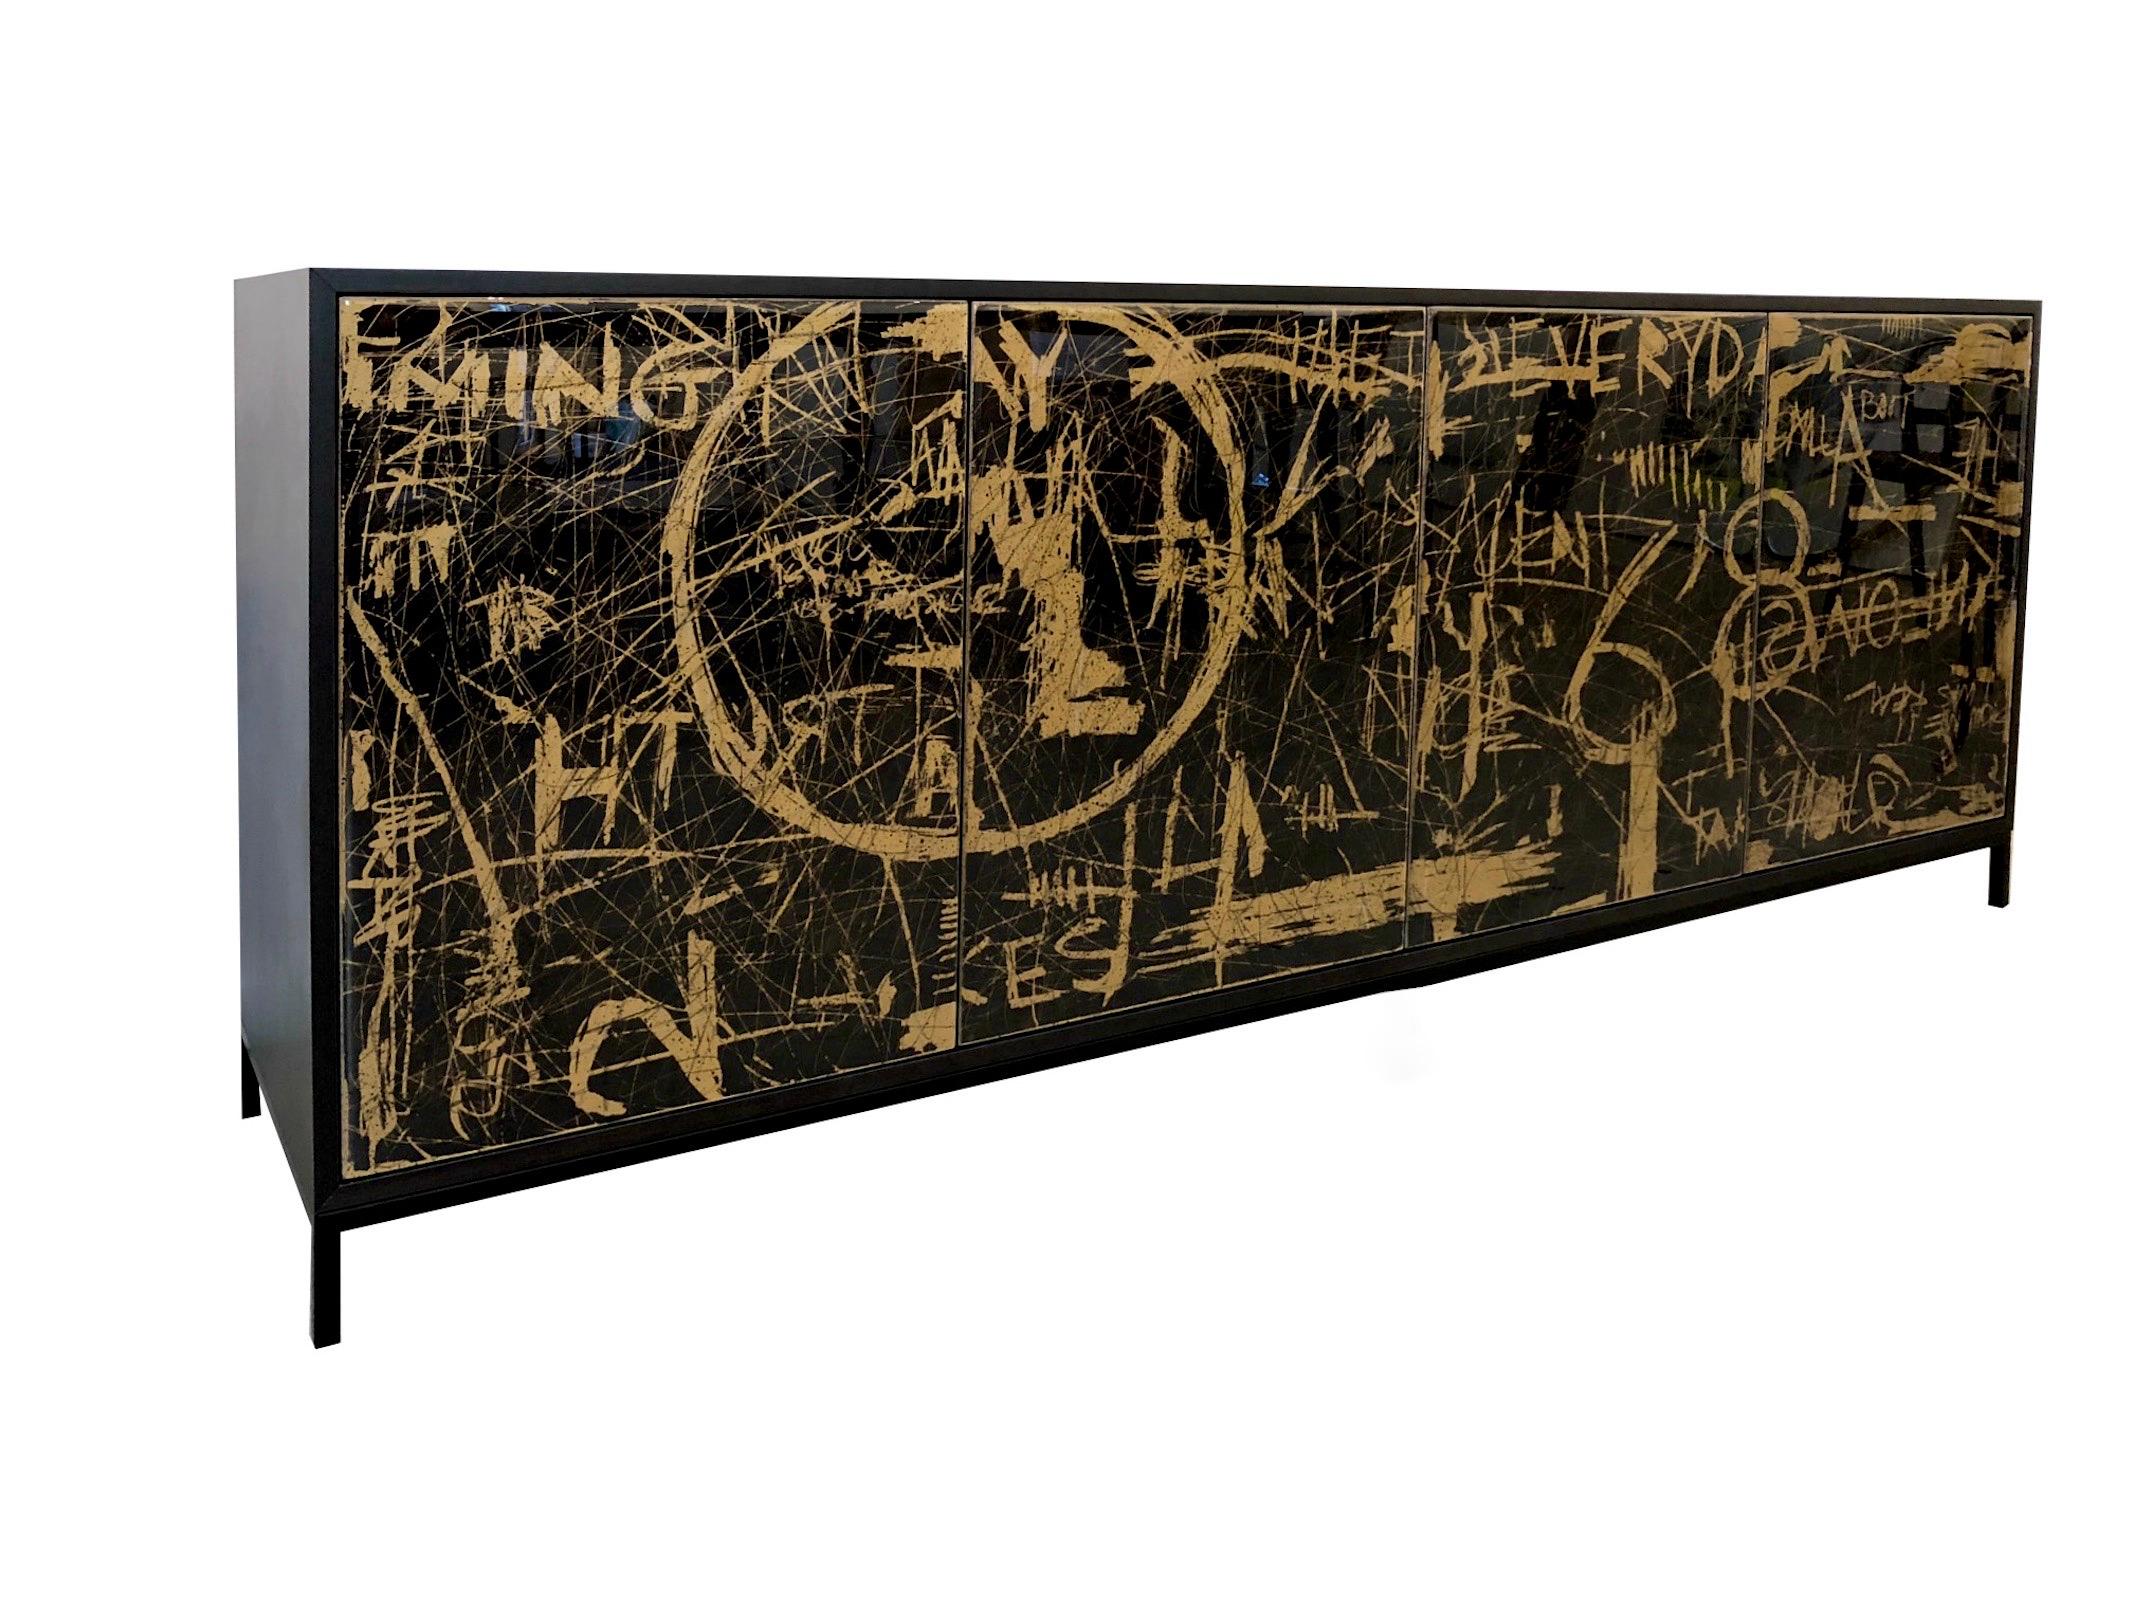 The Duncan Cabinet is design and finished in our Toronto studio, Morgan Clayhall

Based on the century old technique of Sgraffito, the artwork is created by using a double layer technique. The artist scratches by hand into the panel and seals the